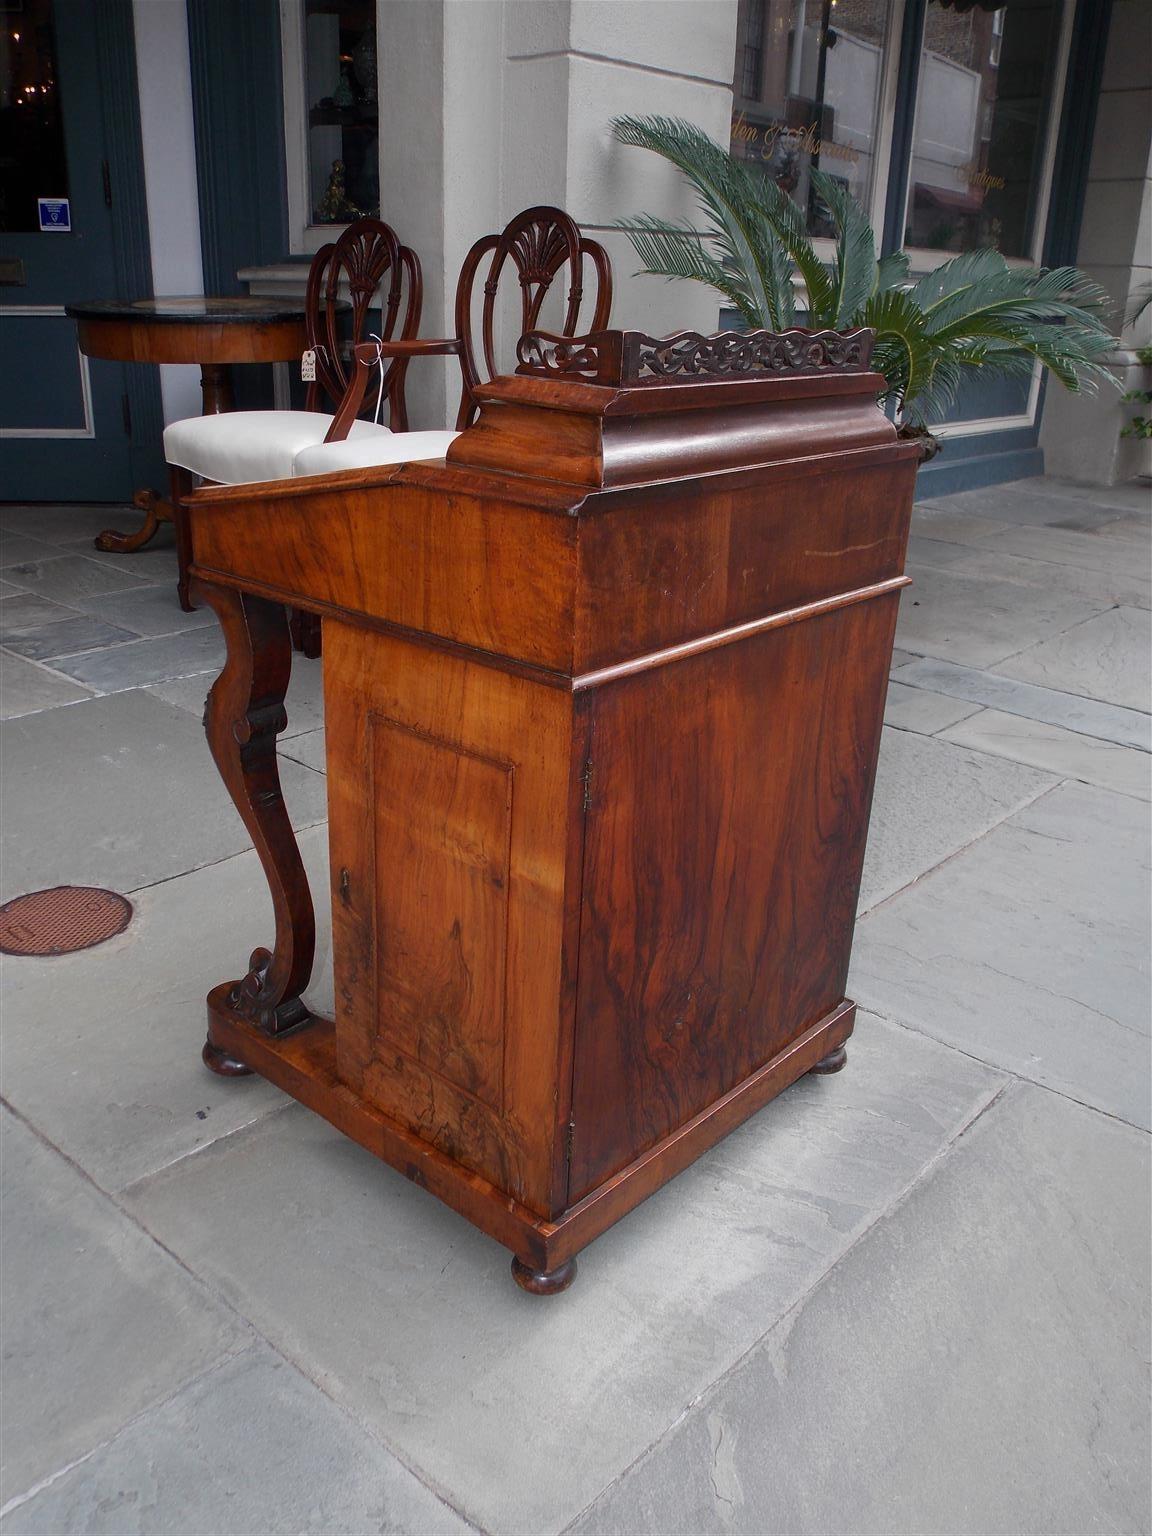 English Burl Walnut Leather Top Davenport with Acanthus Cabriole Legs Circa 1840 For Sale 3